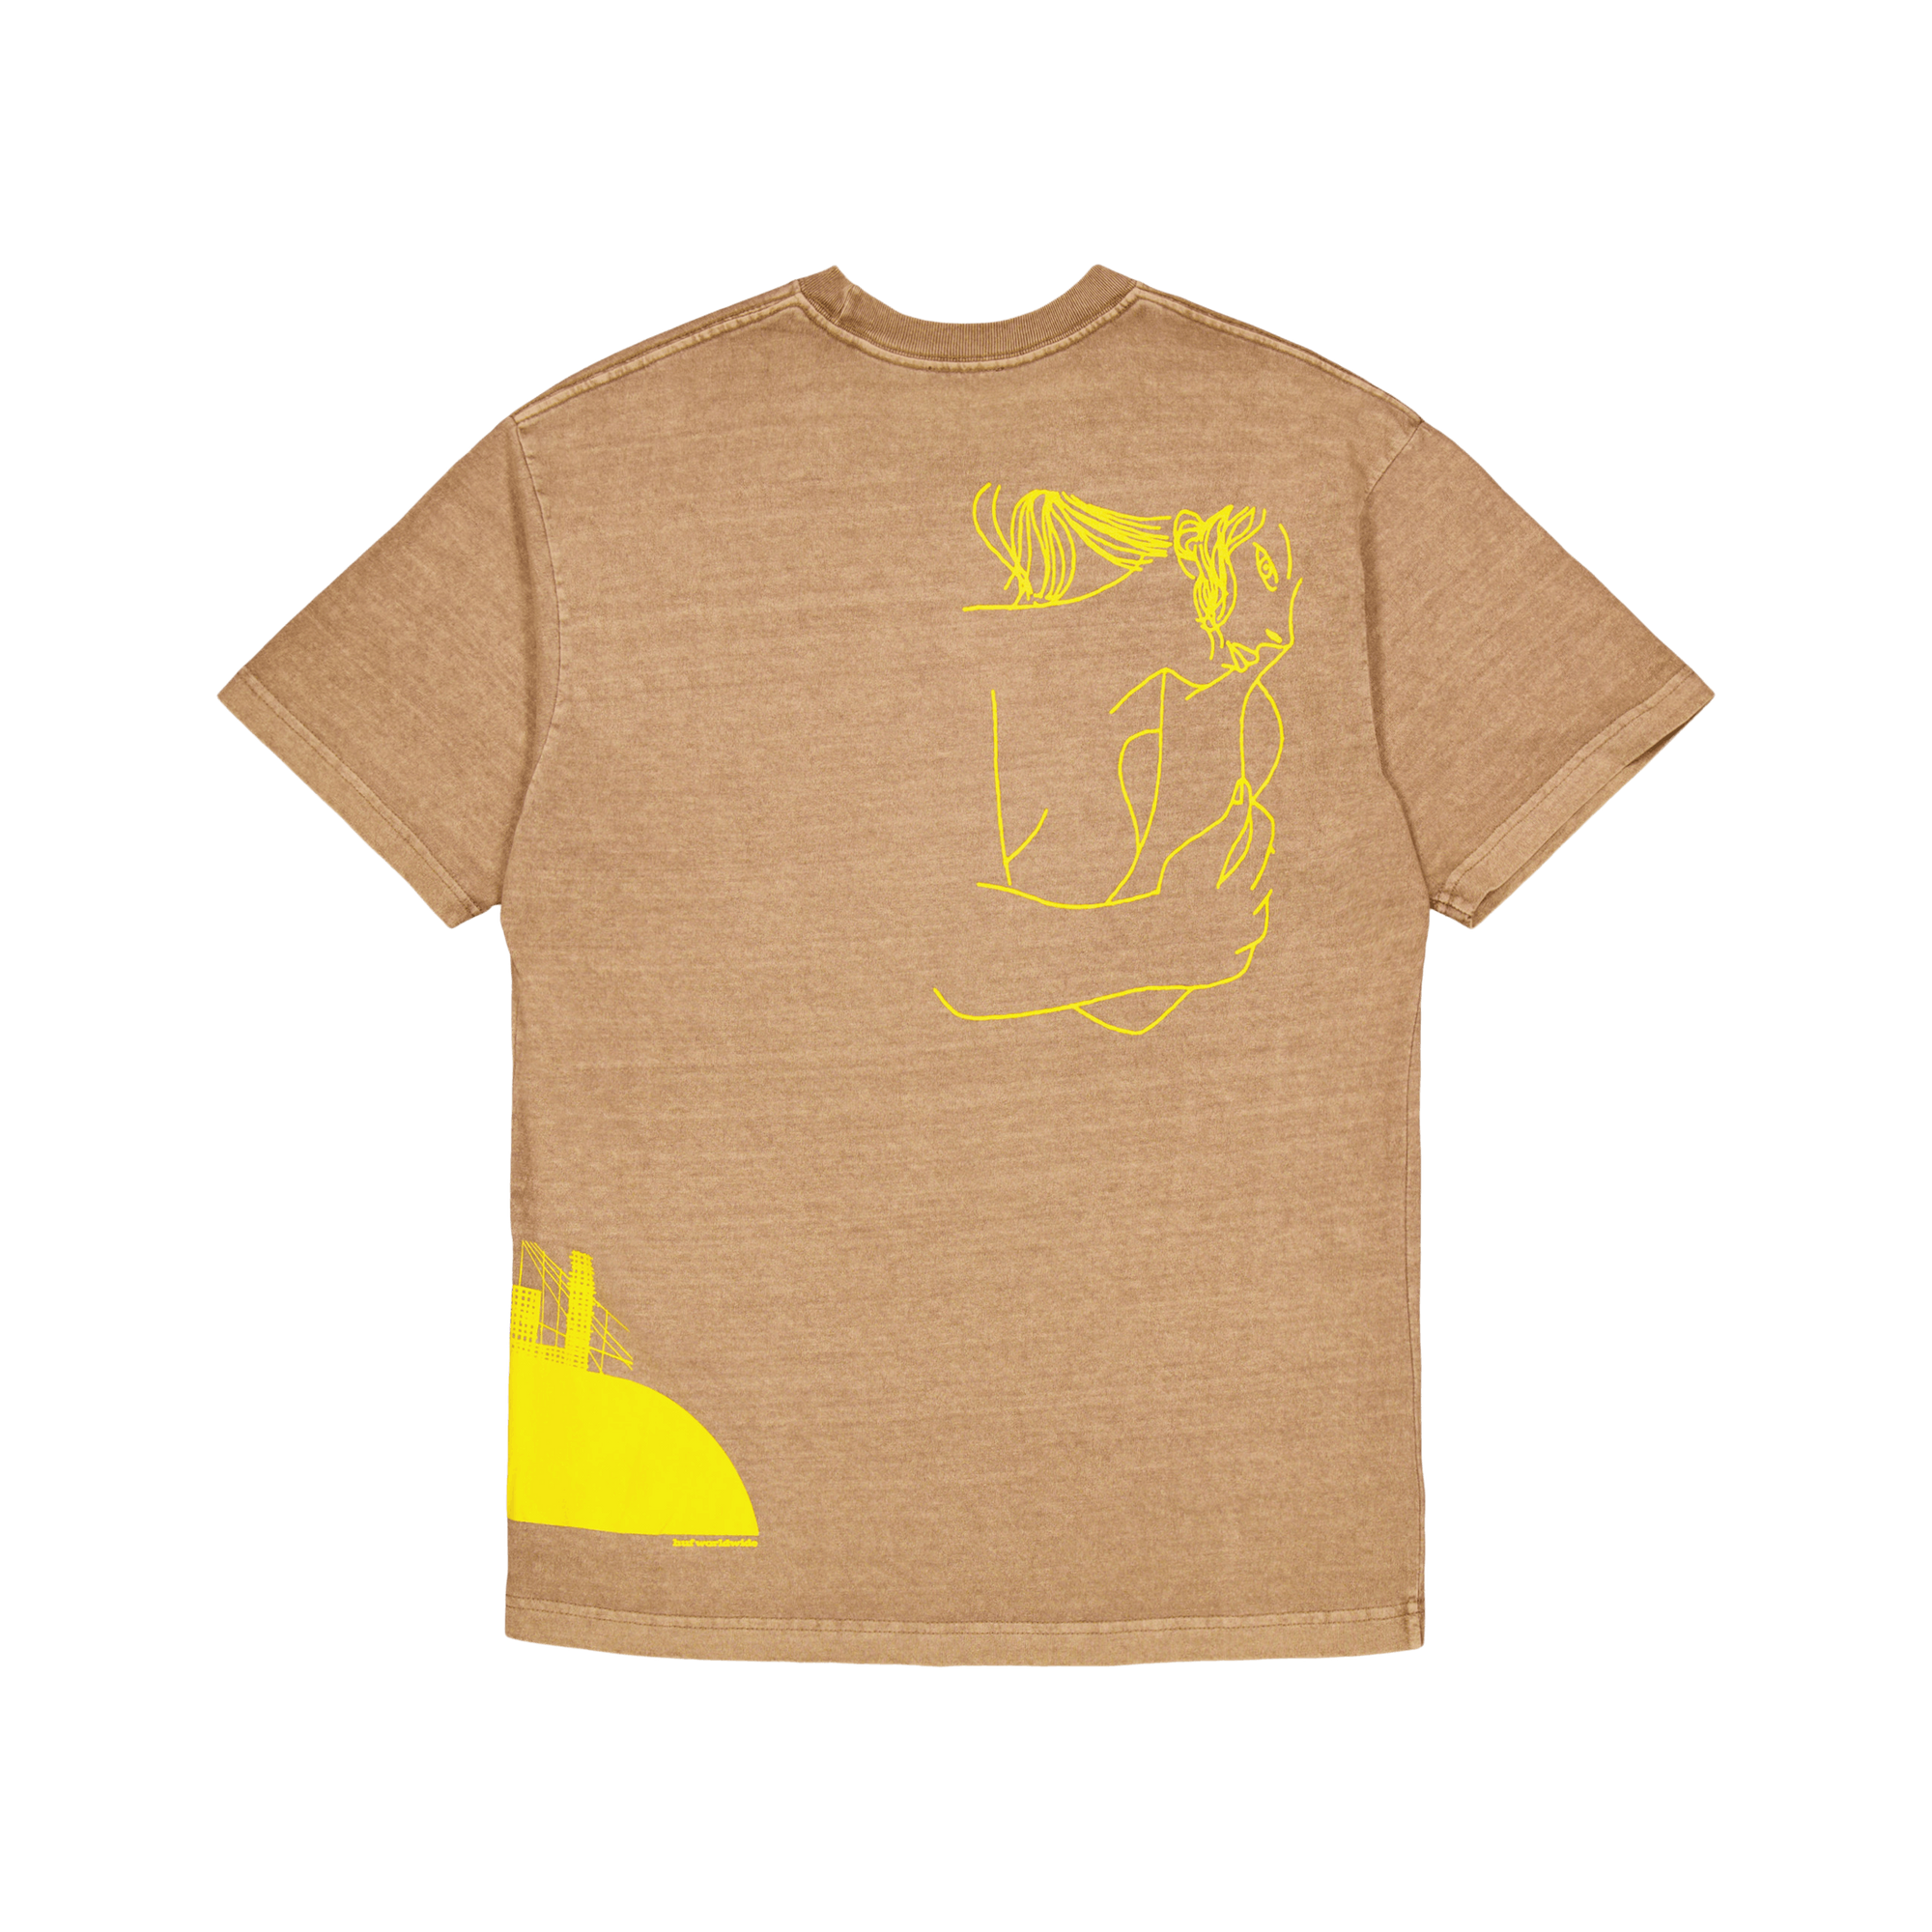 Loosies Washed S/s Tee Camel